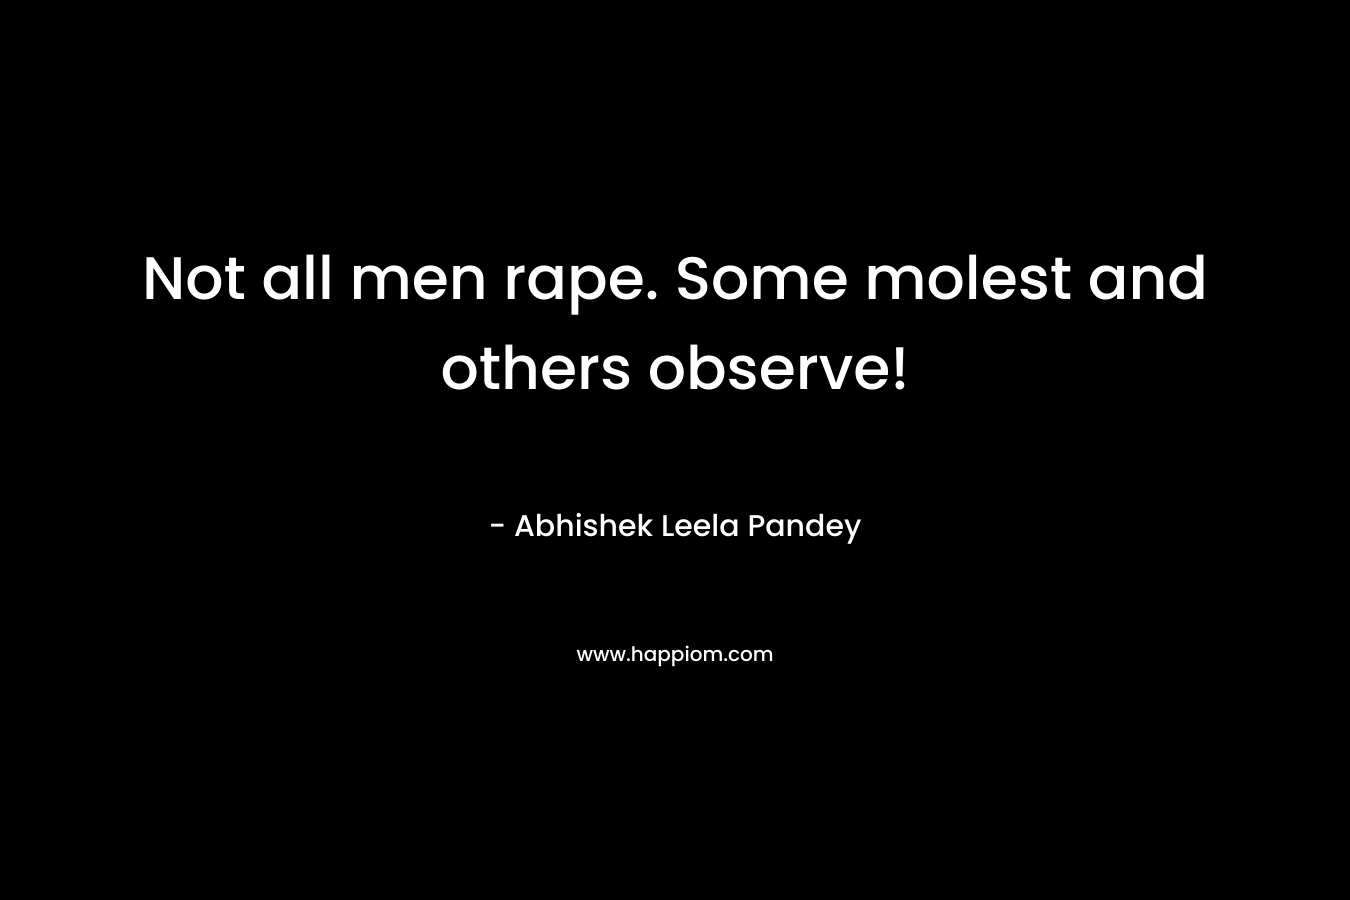 Not all men rape. Some molest and others observe!